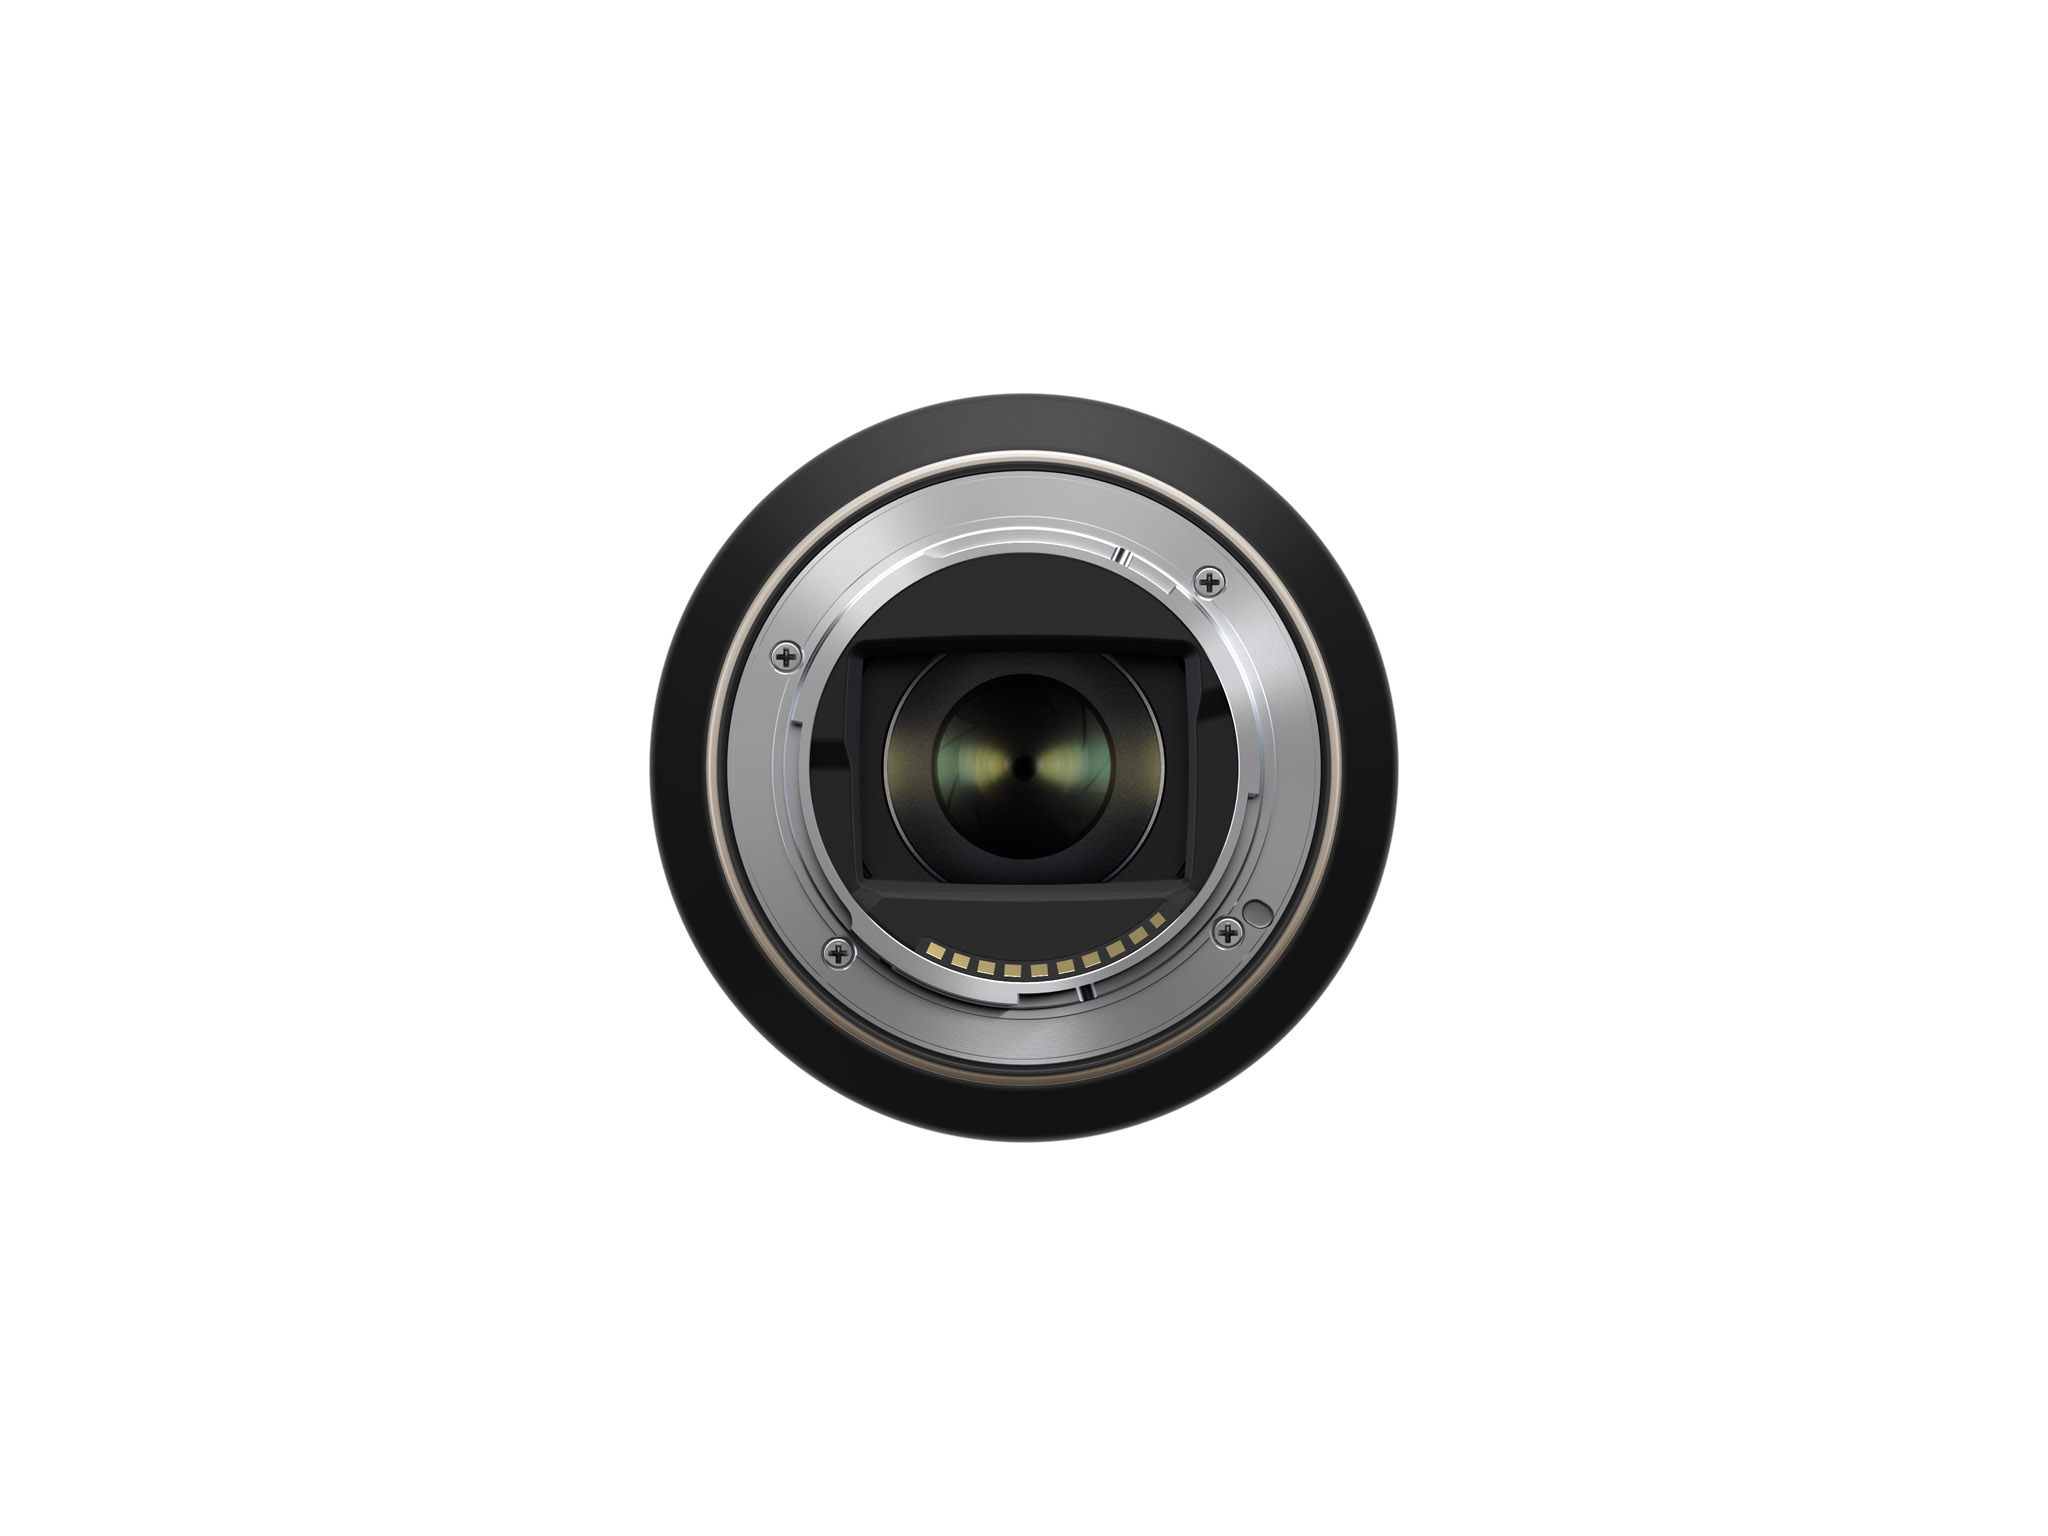 Tamron 17-70/2.8 Di III │ A Perfect All-in-One Versatile Lens for your Sony  APS-C Camera! - Precision Camera and Video